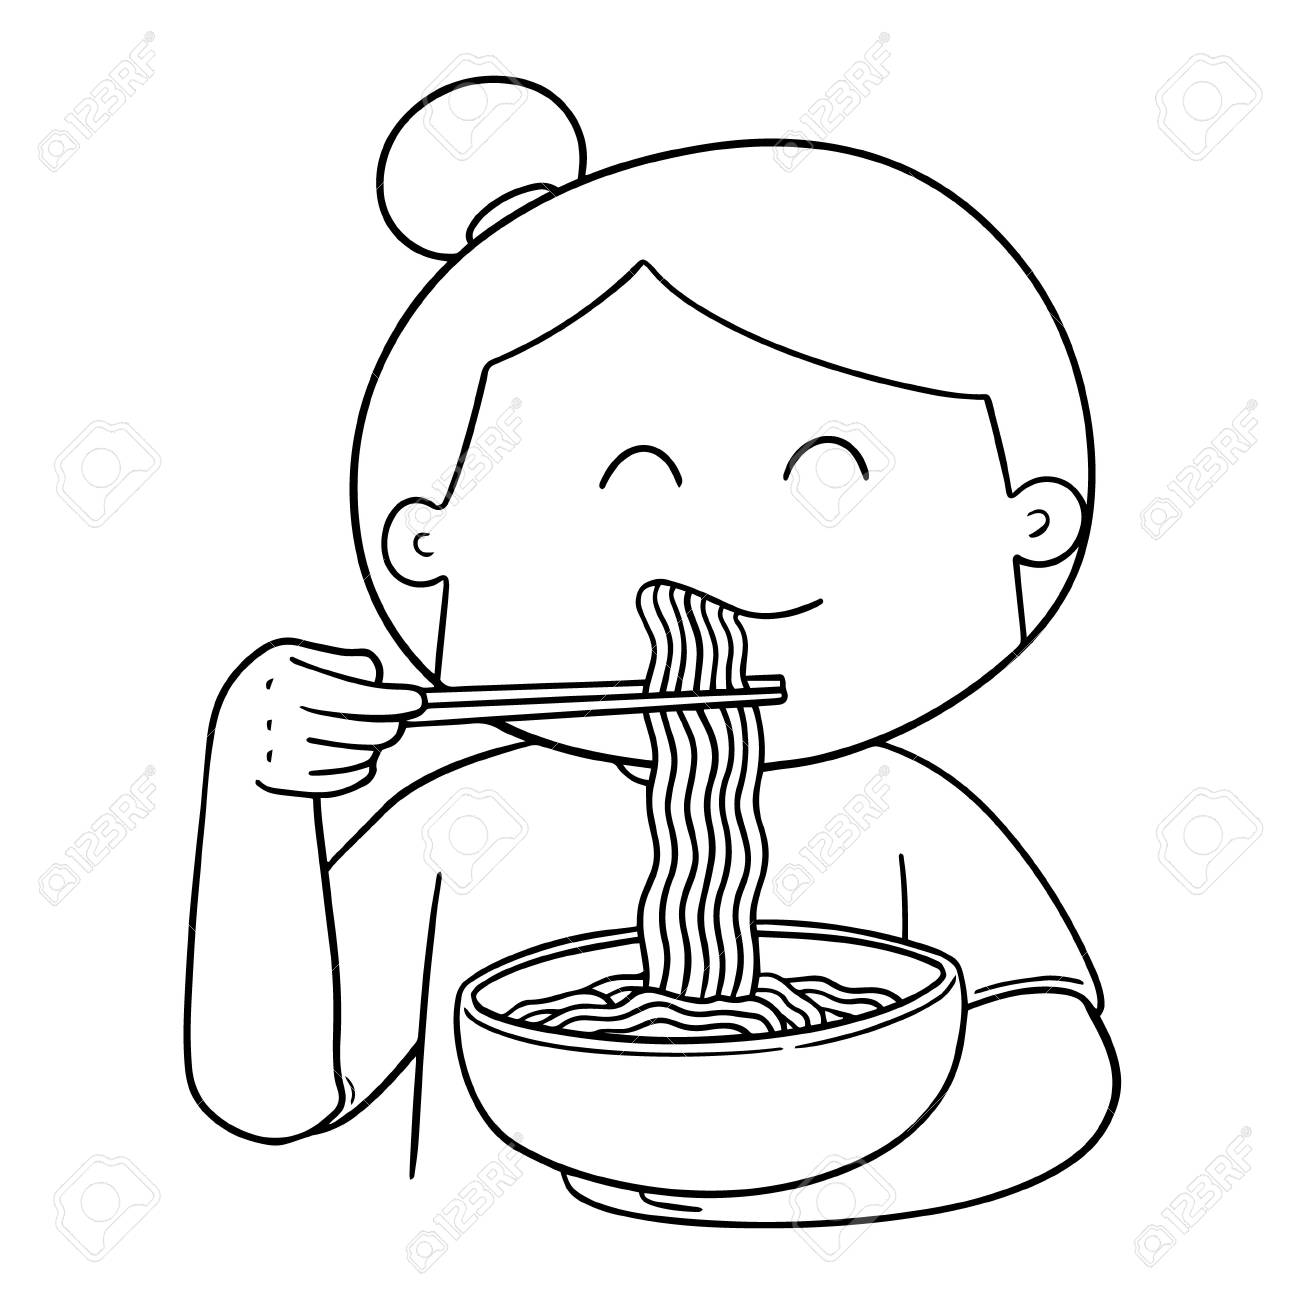 Eating noodles clipart black and white